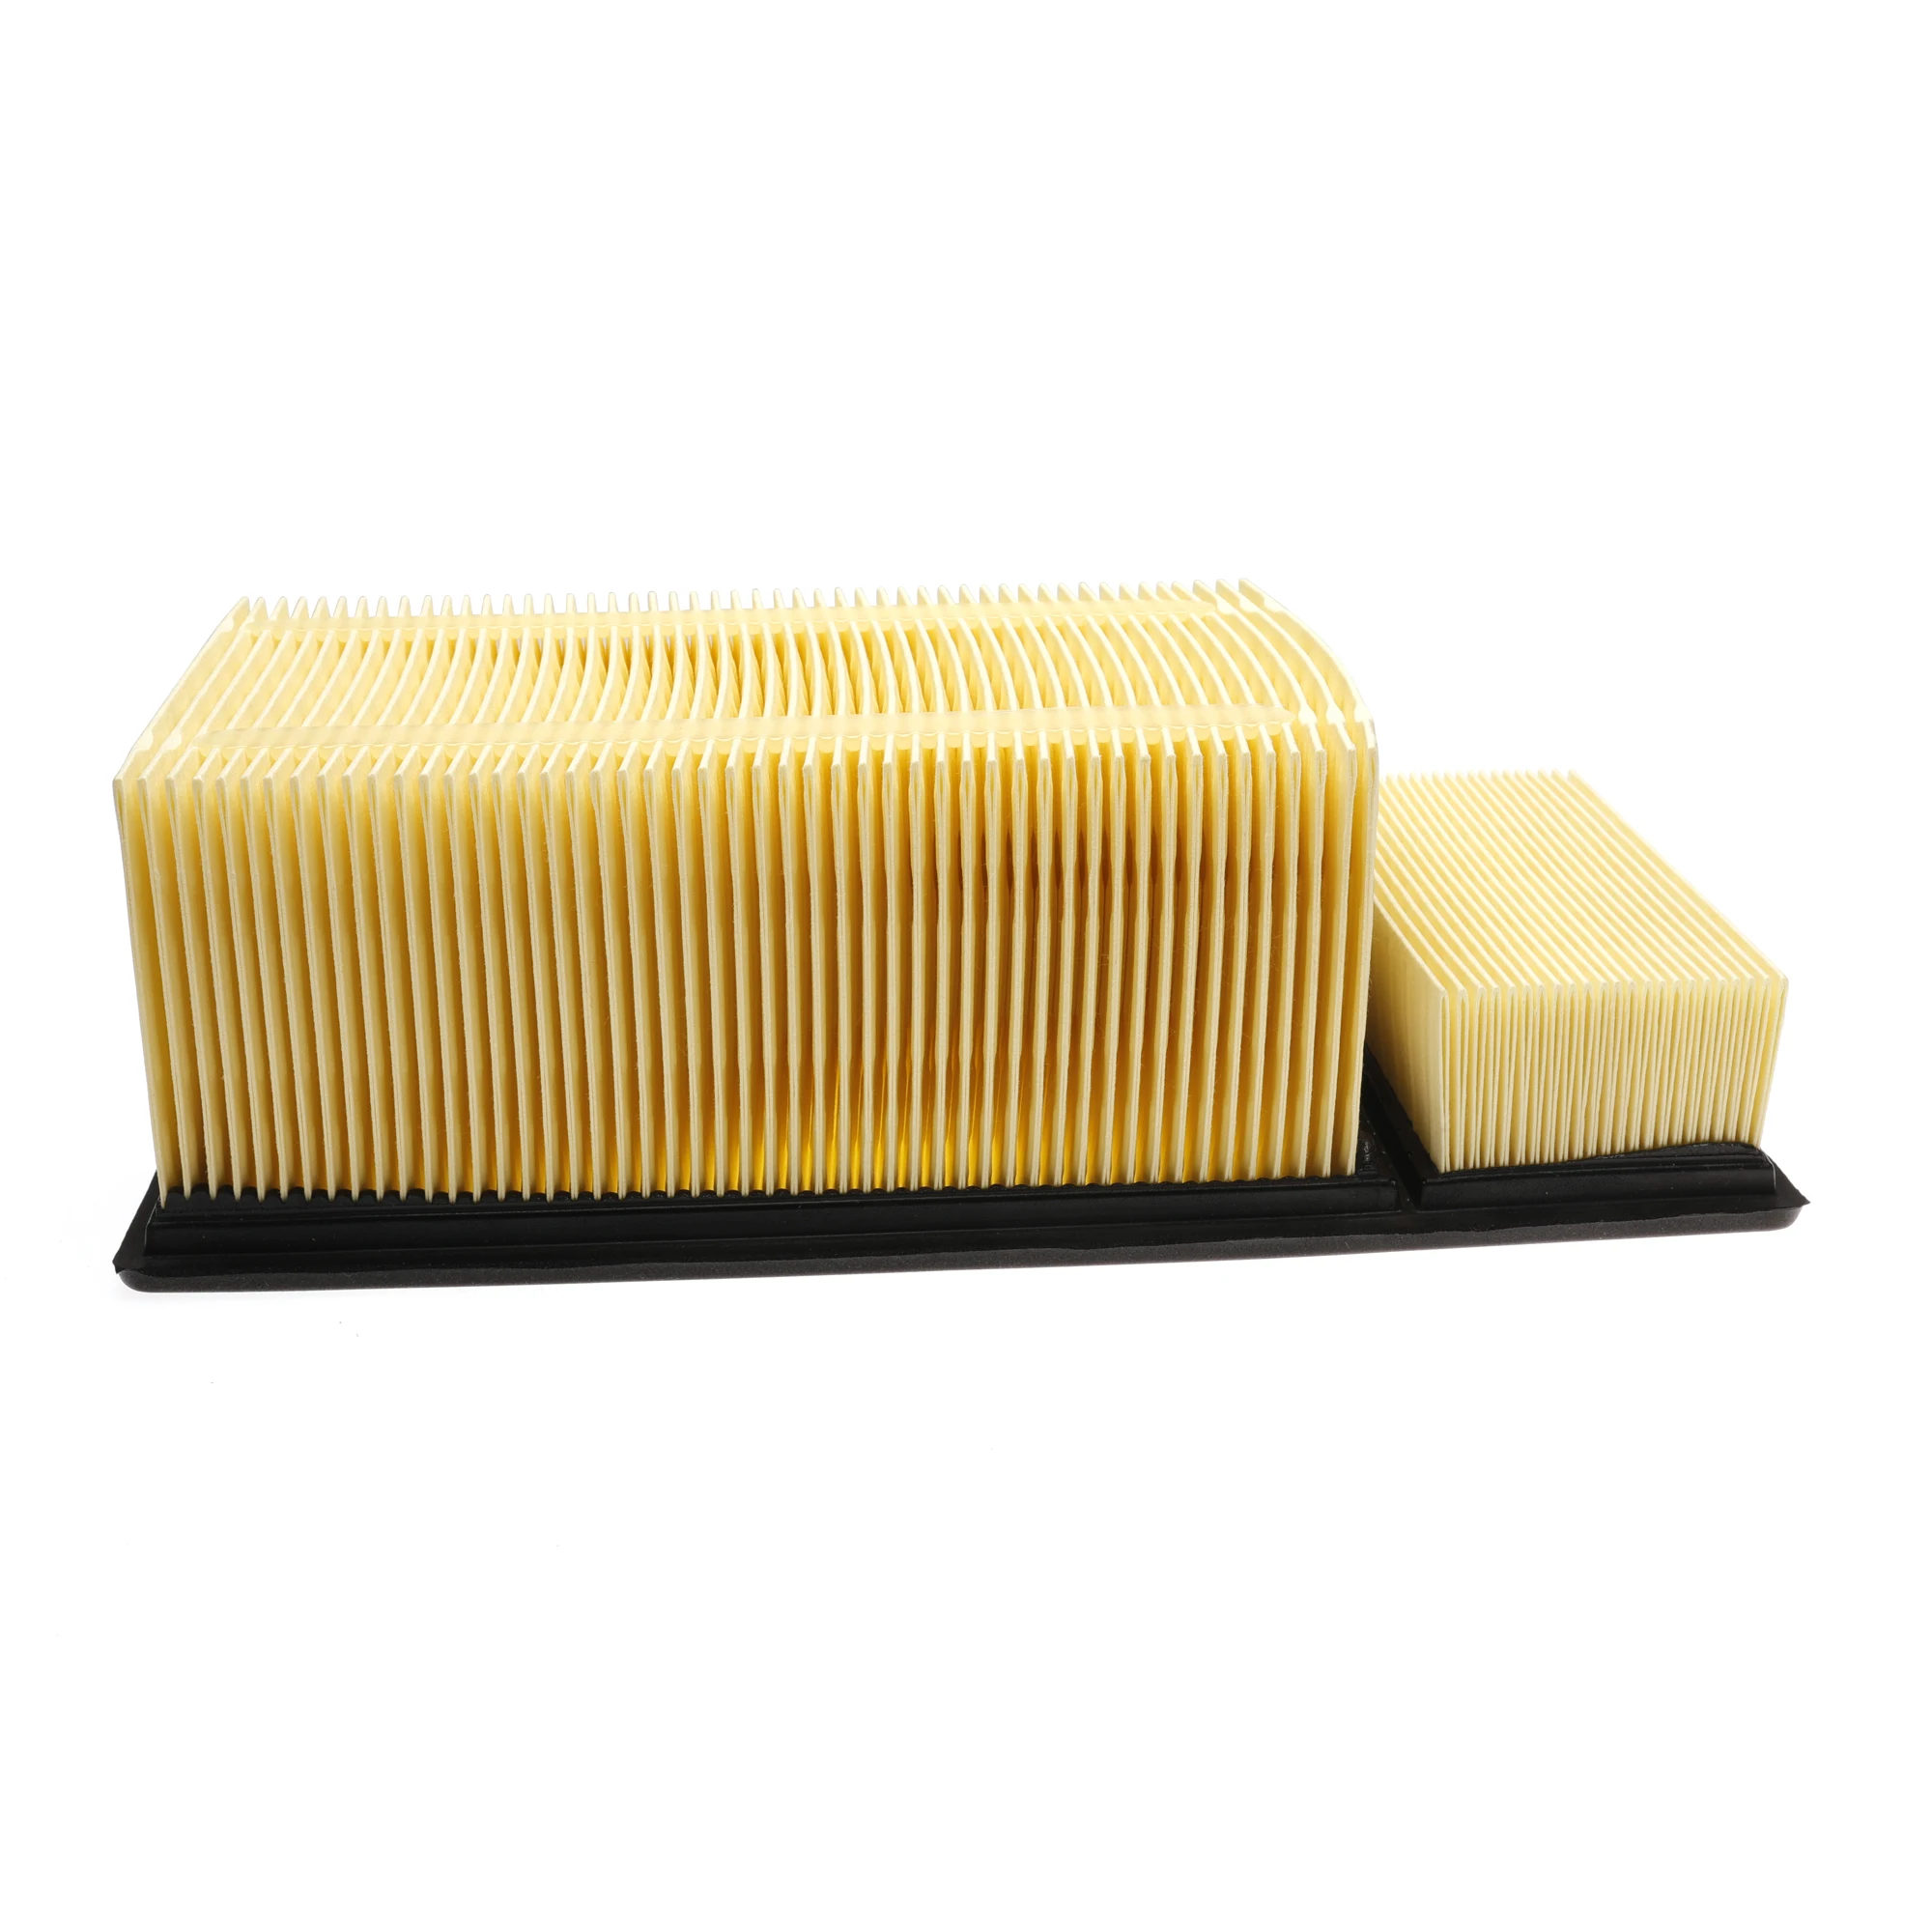 

FA-1902 Premium Air Filter High Capacity Engine For 11-16 Ford Powerstroke 6.7L Diesel Replace OE Part # BC3Z-9601-A